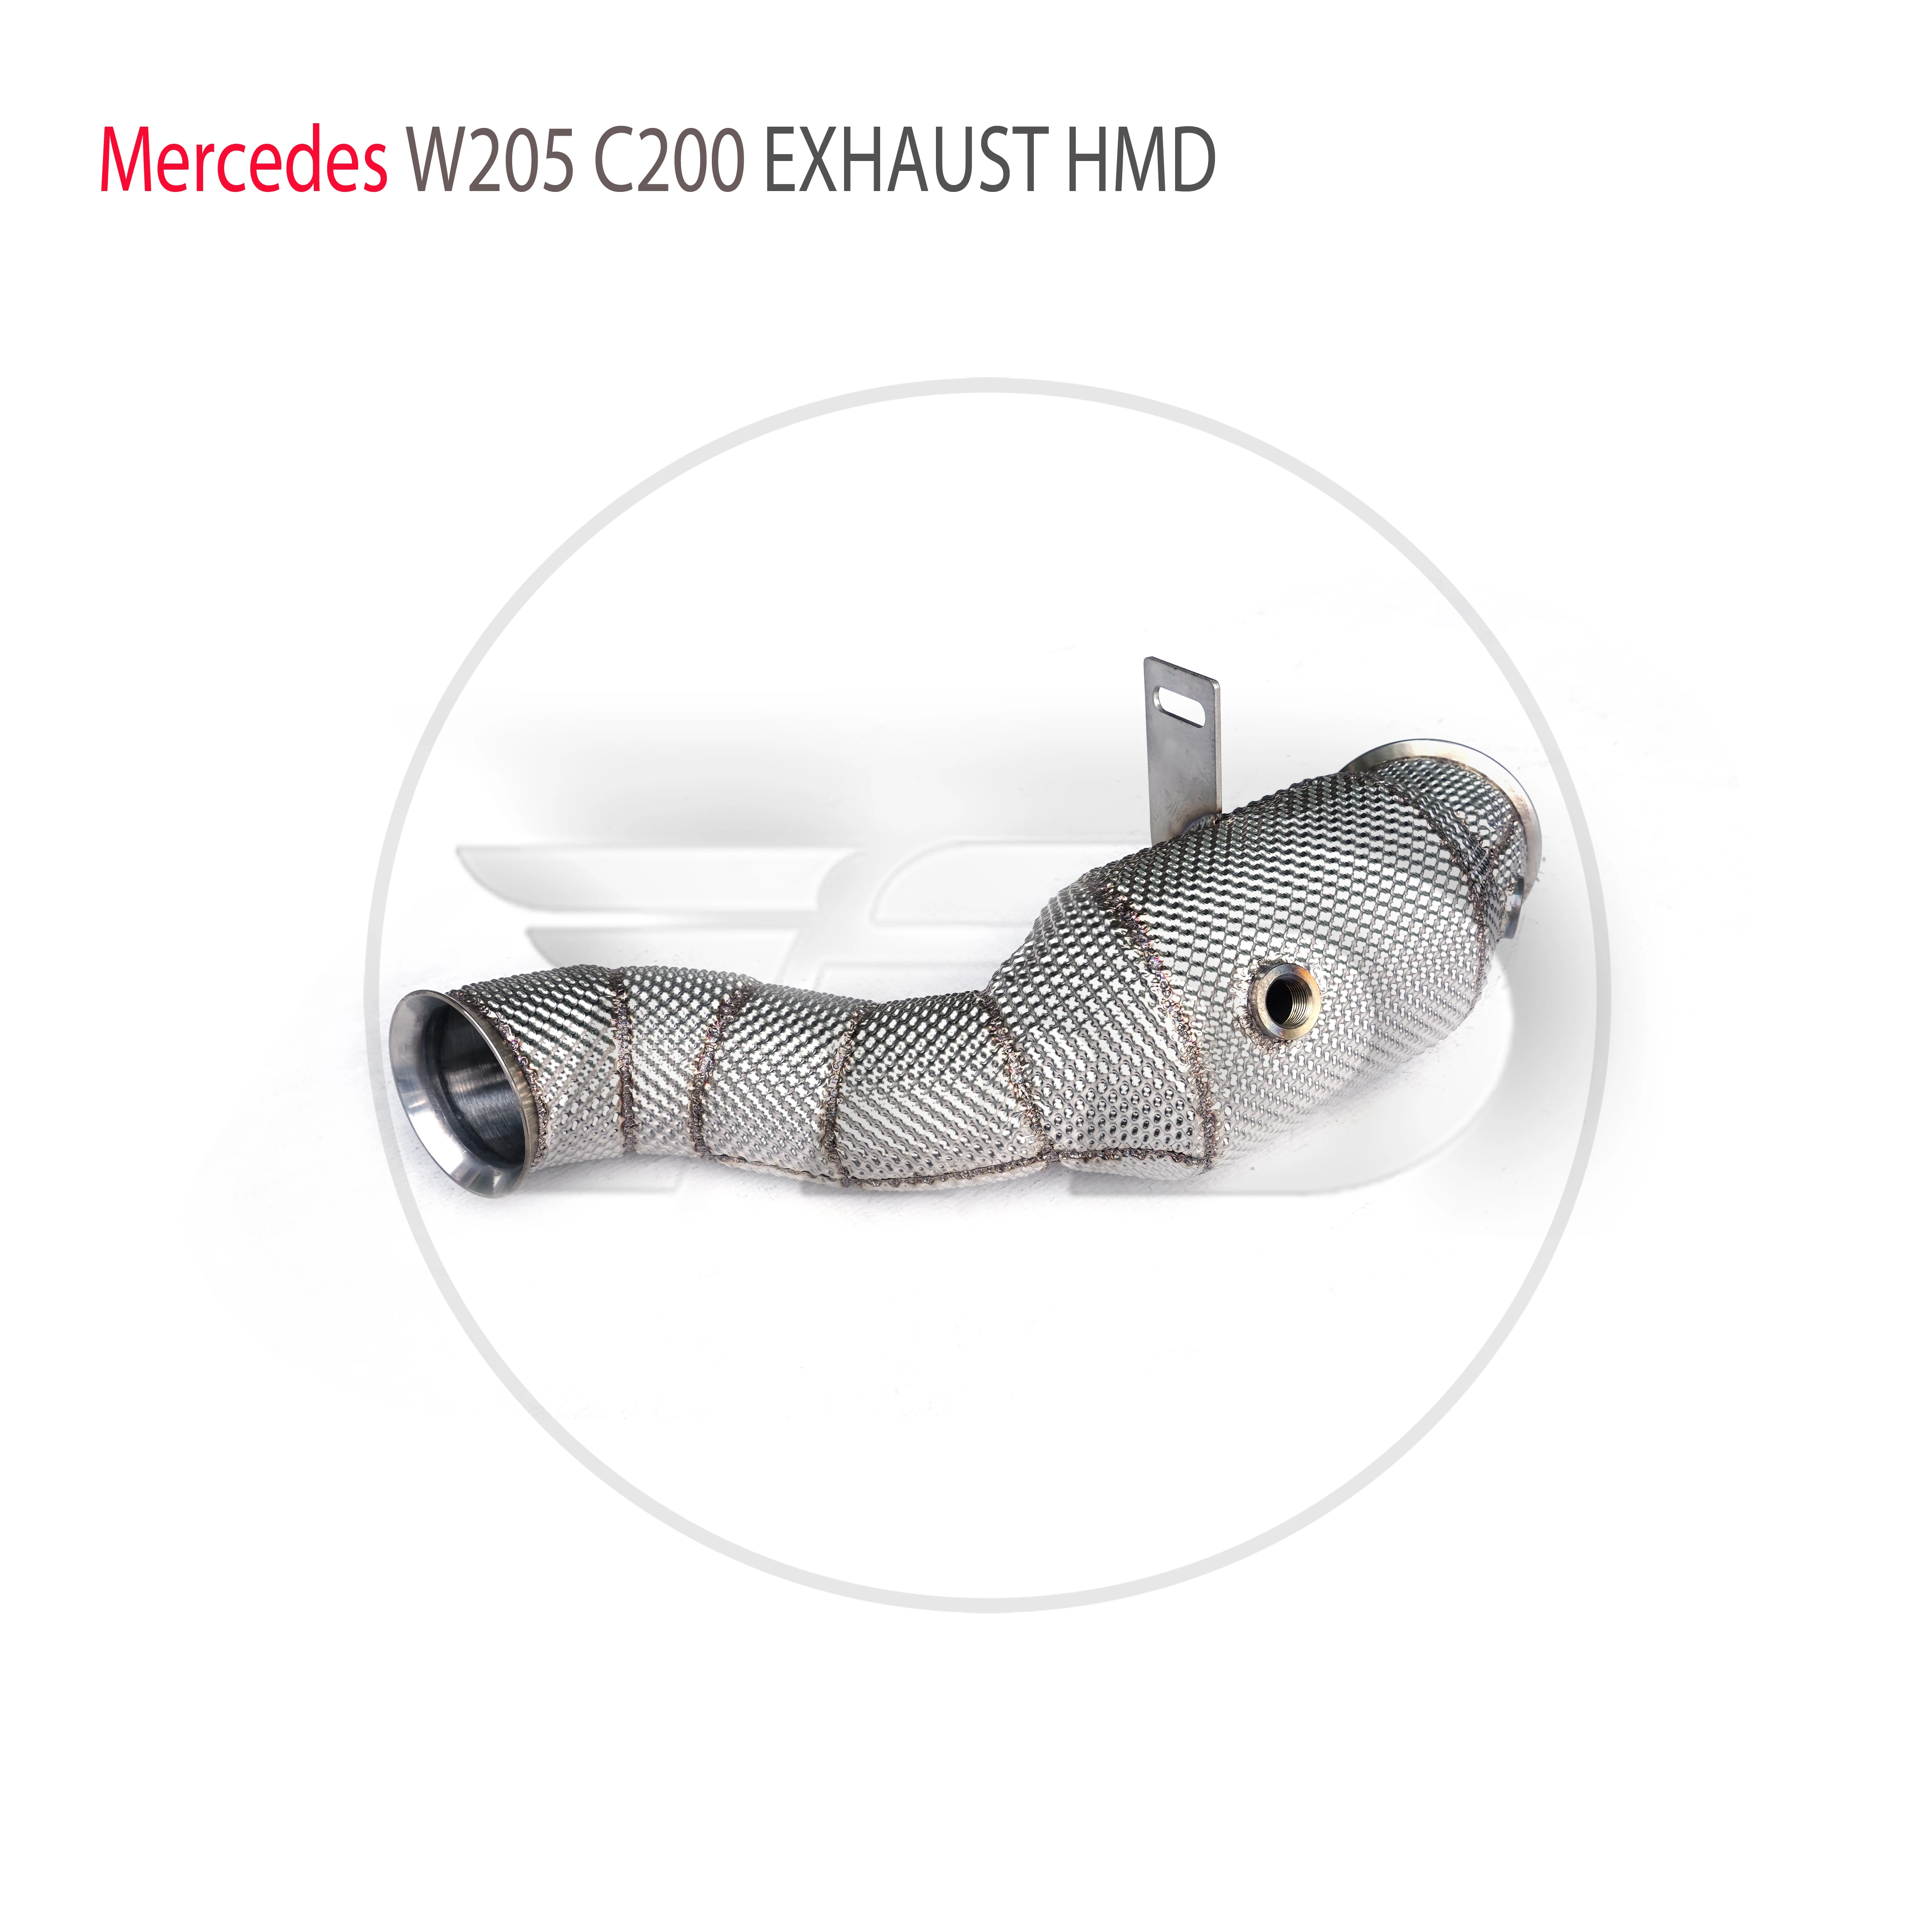 

HMD Exhaust System High Flow Performance Downpipe for Mercedes Benz W205 C200 Car Accessories With Catalytic Converter Header